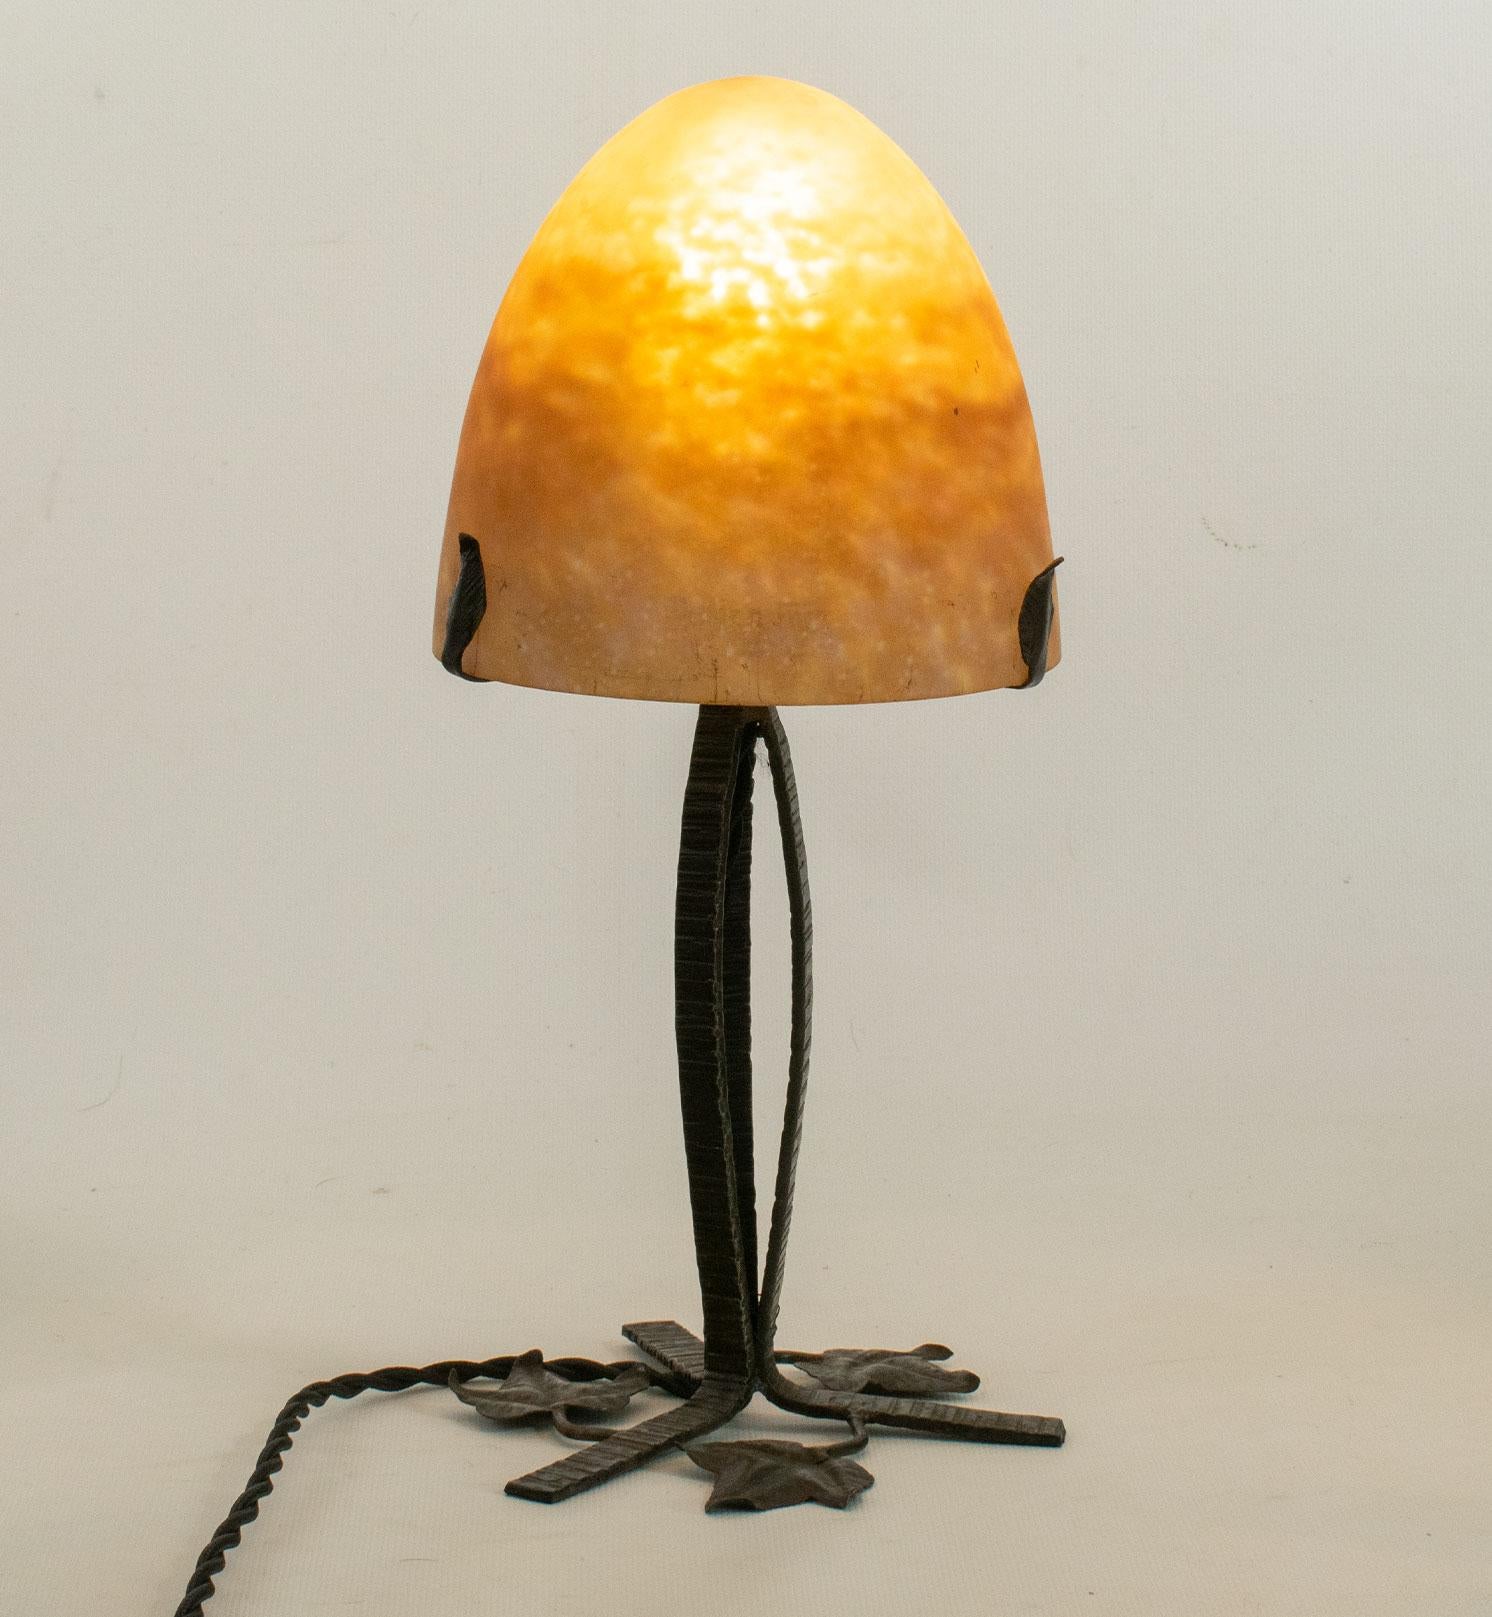 MULLER FRERES, Lunéville, Art Nouveau table lamp in marbled sandblasted glass, wrought iron base. Production is around 1900 which is contemporary with the times and the Art Nouveau period. This is an original period piece.
Signed.
Height 34cm.

The